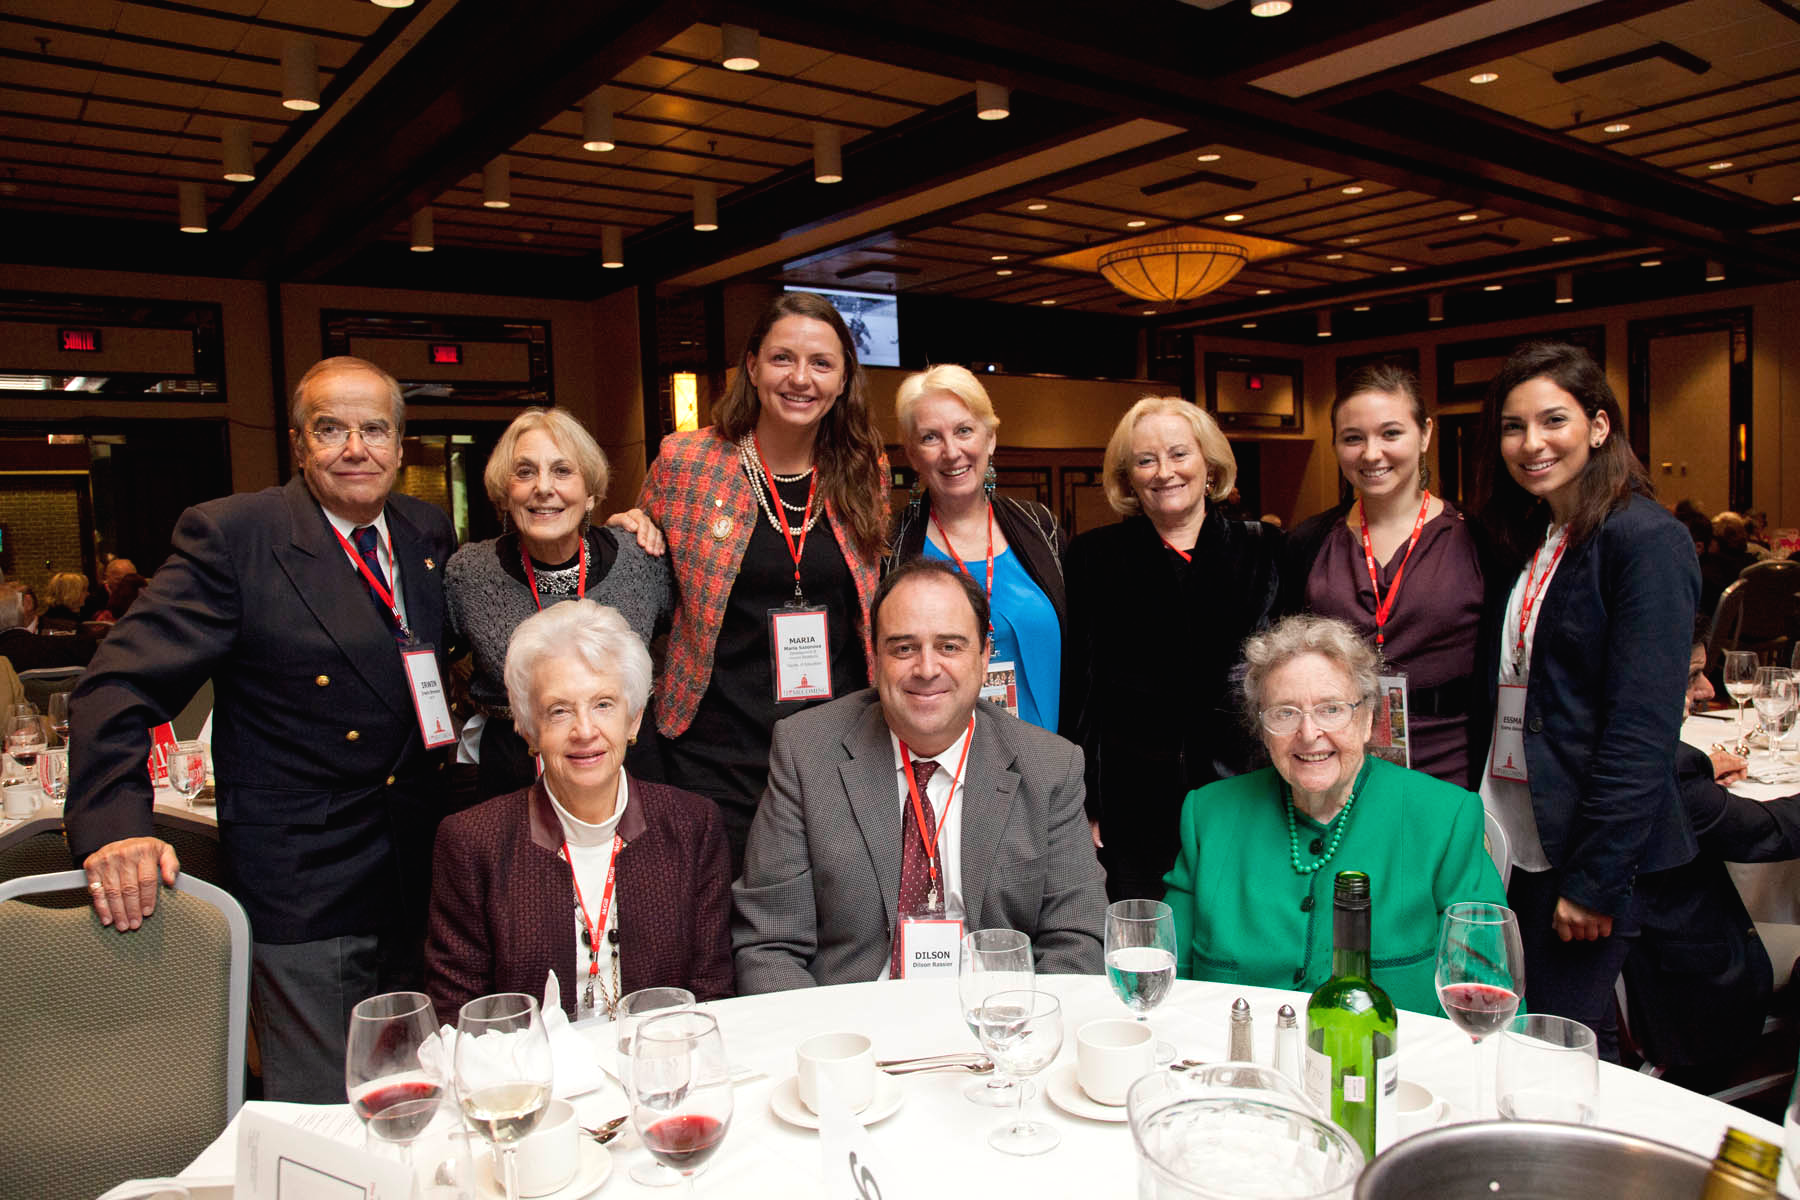 Group photo at the 2013 Leacock Luncheon, including Mary Marsh, Dilson Rassier and eight others. 